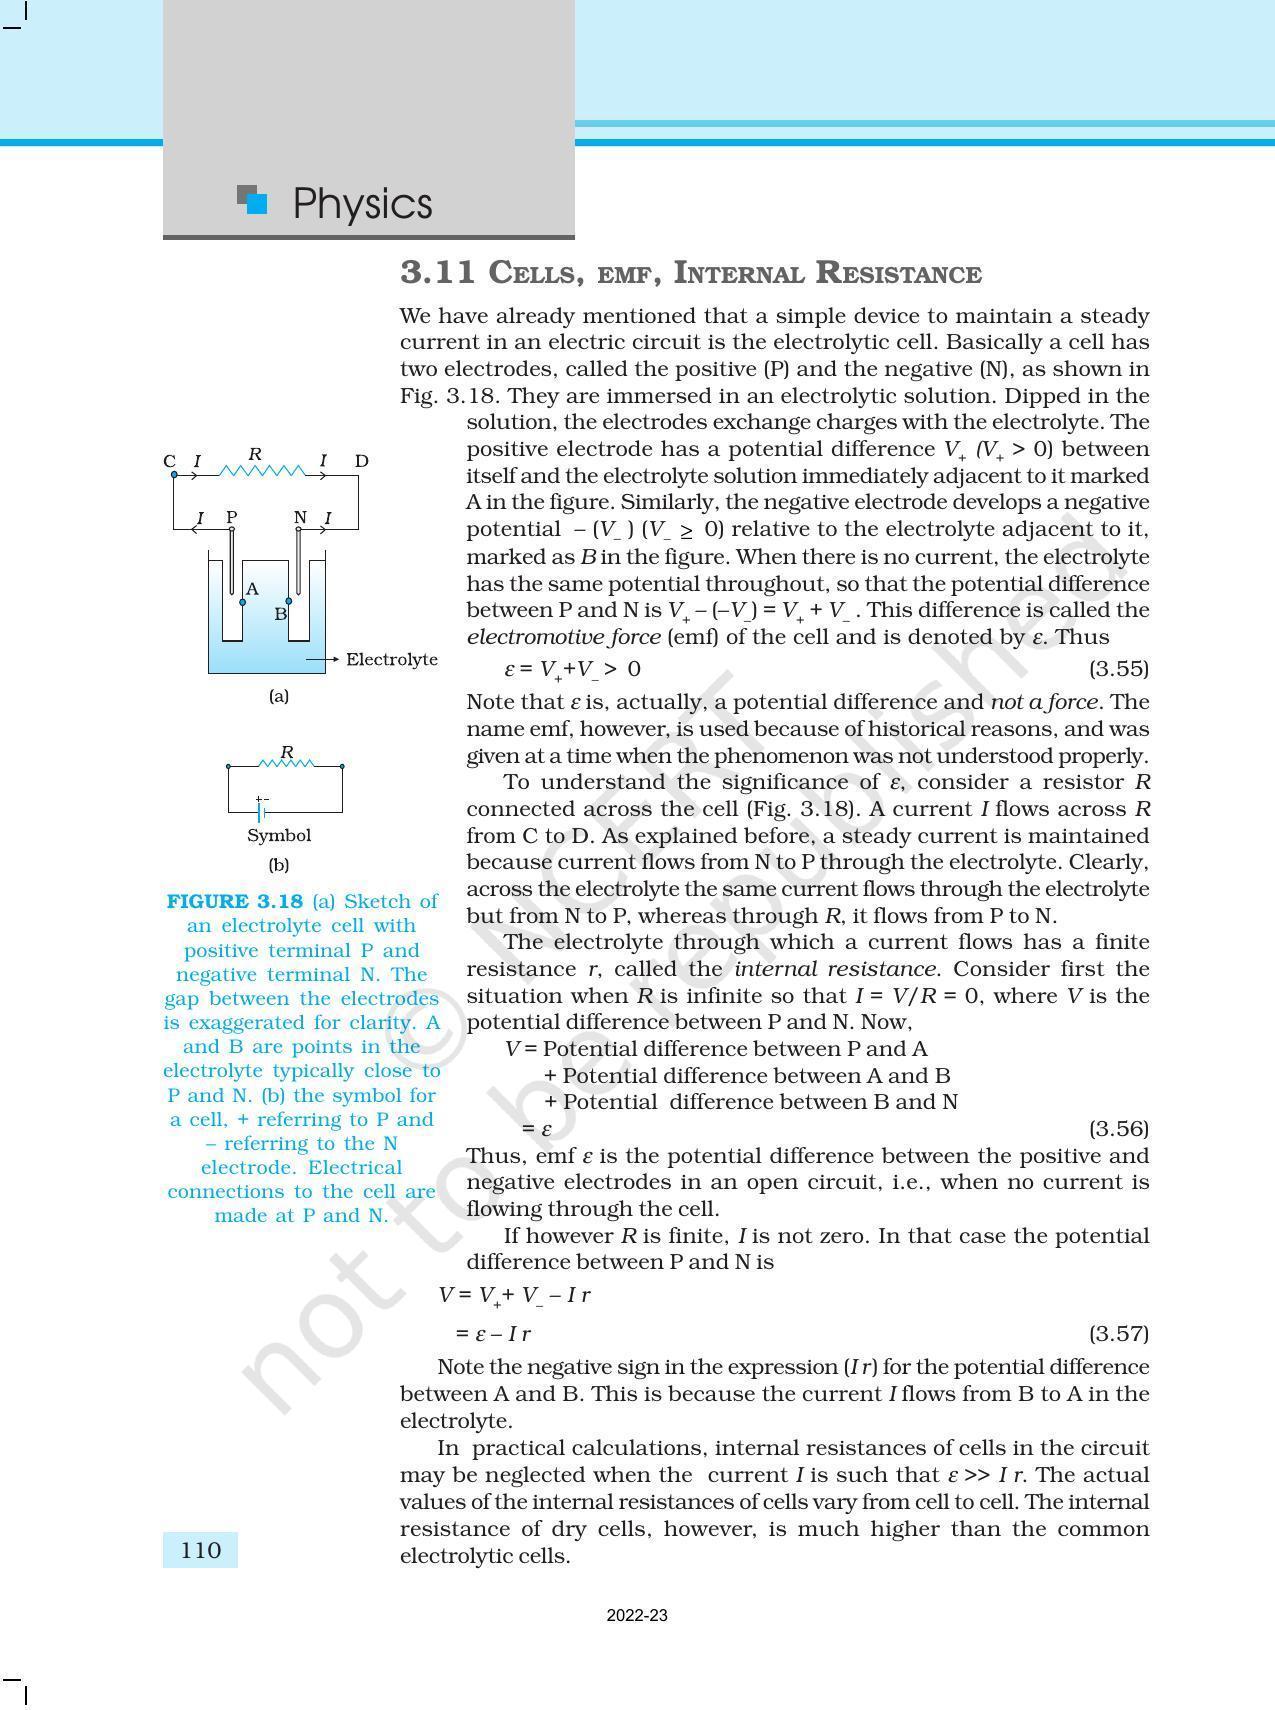 NCERT Book for Class 12 Physics Chapter 3 Current Electricity - Page 18